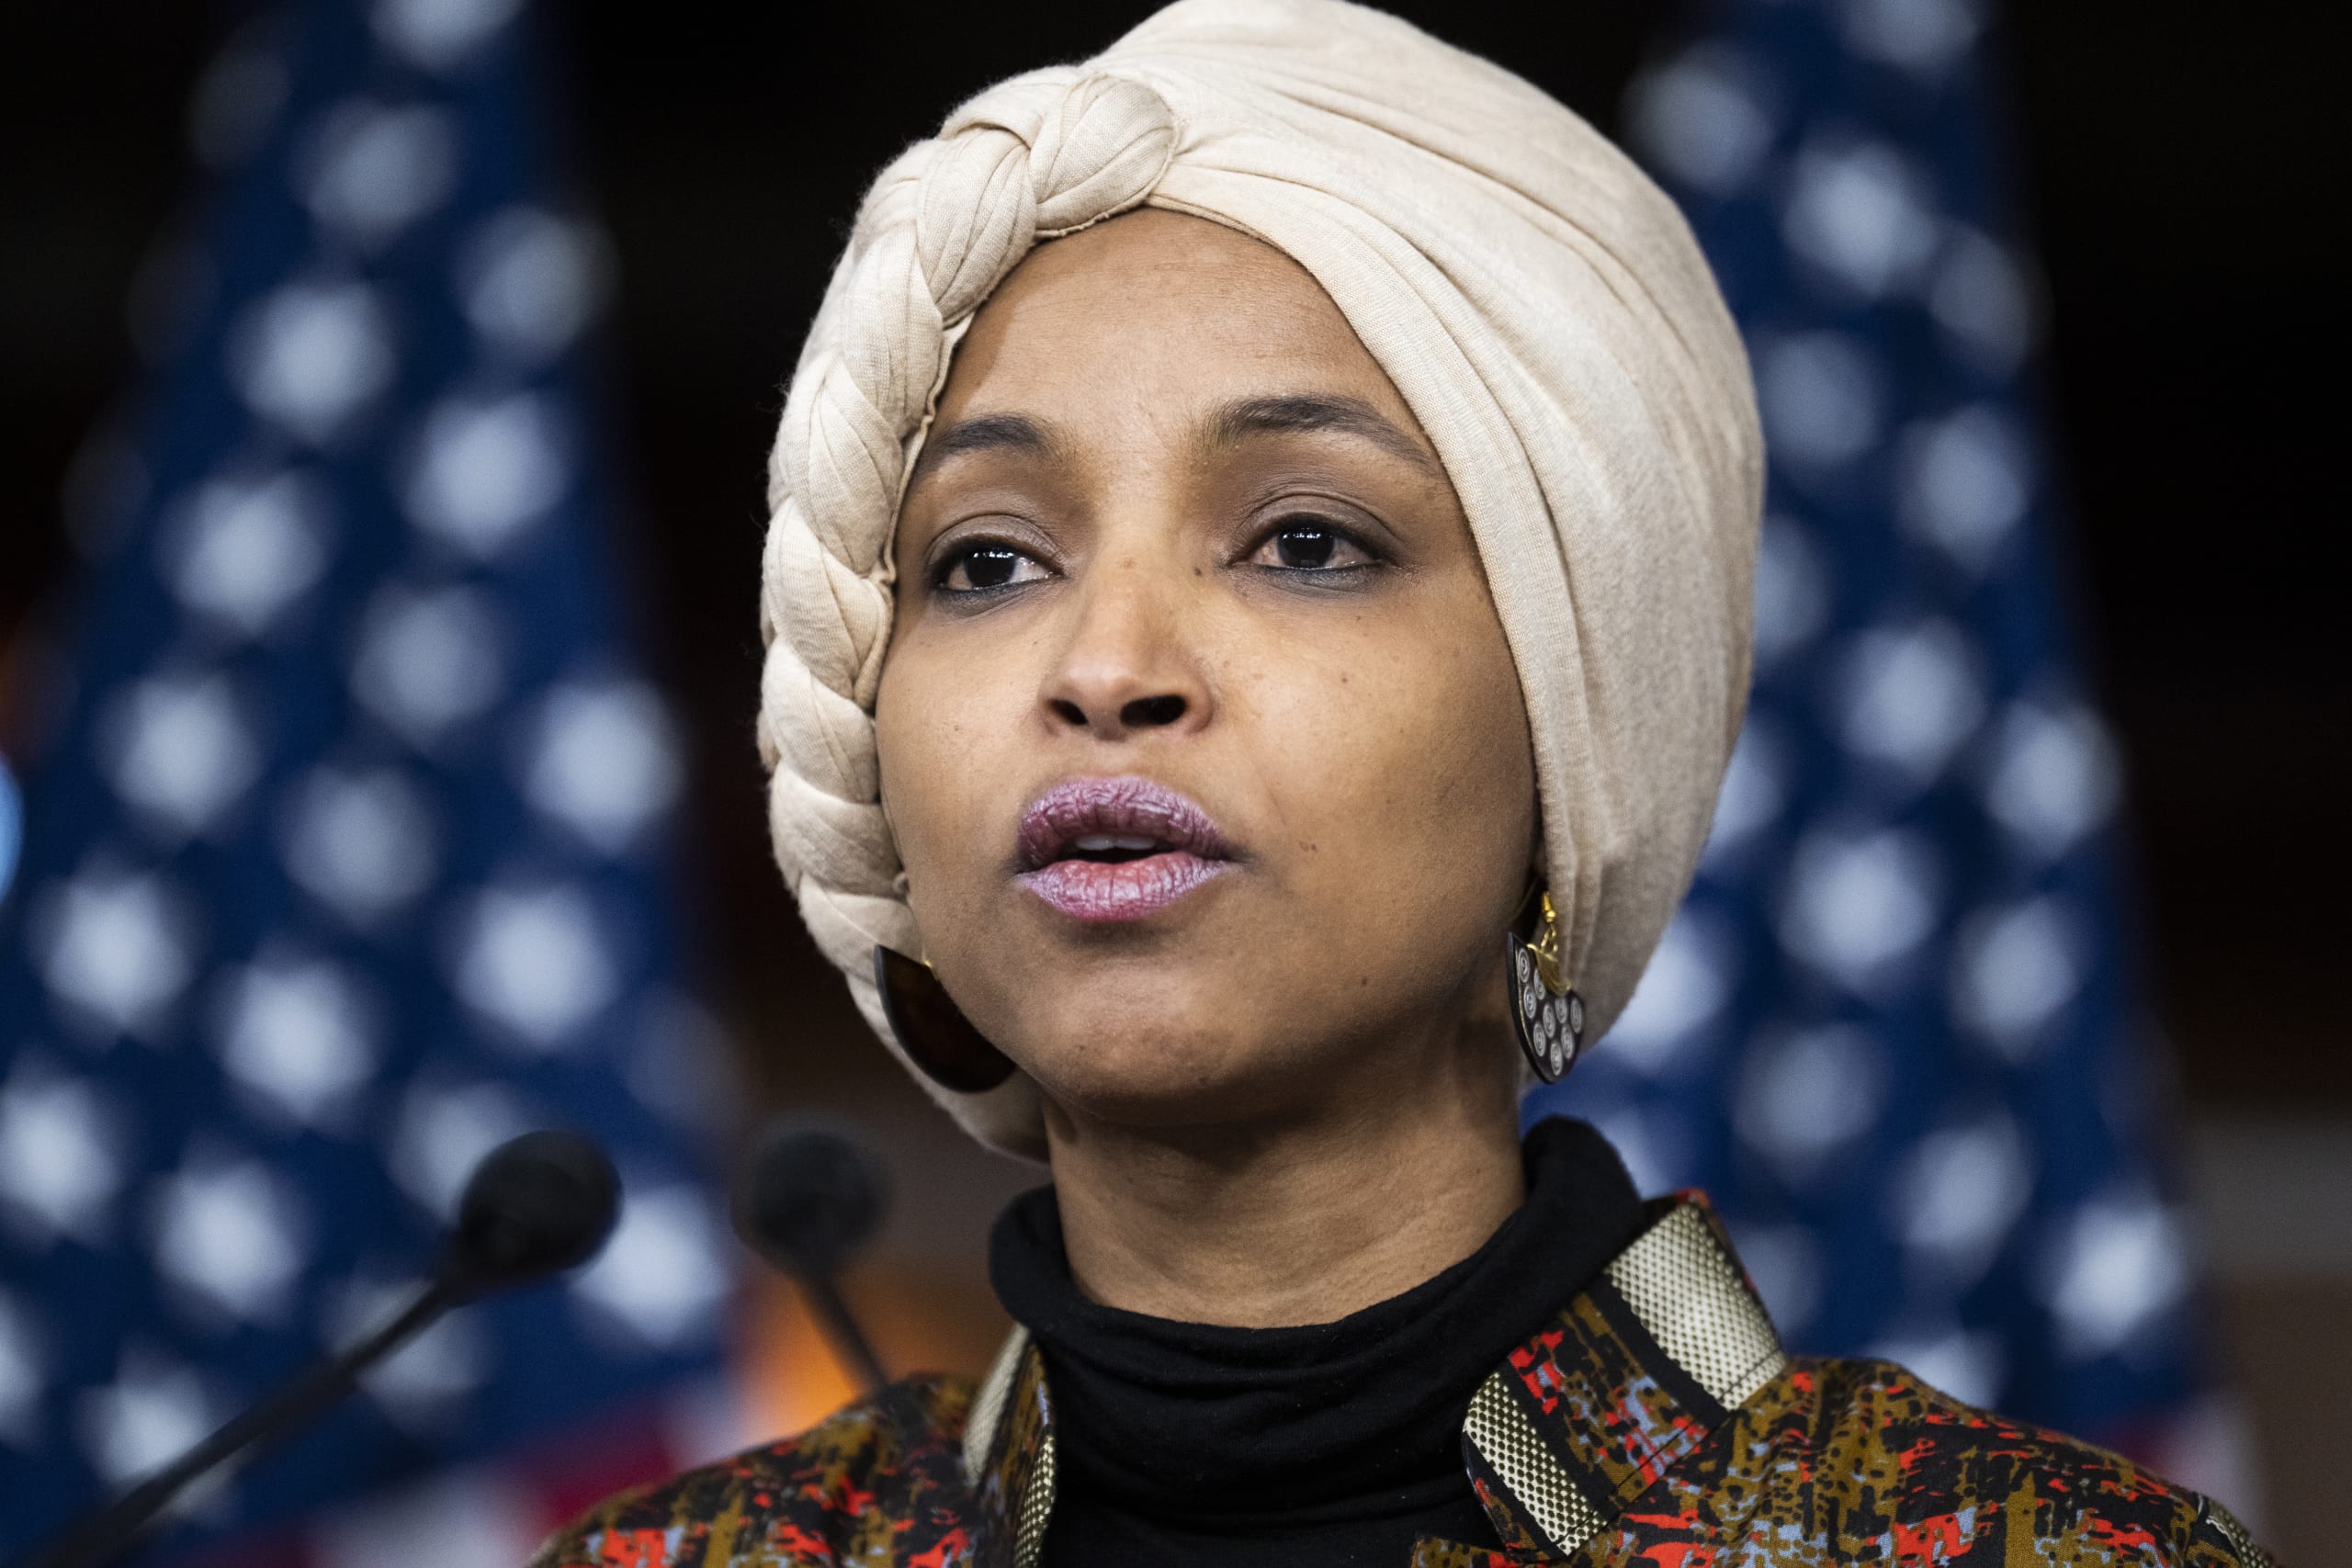 Rep. Marjorie Taylor Greene slammed for introducing resolution to censure Rep. Ilhan Omar 